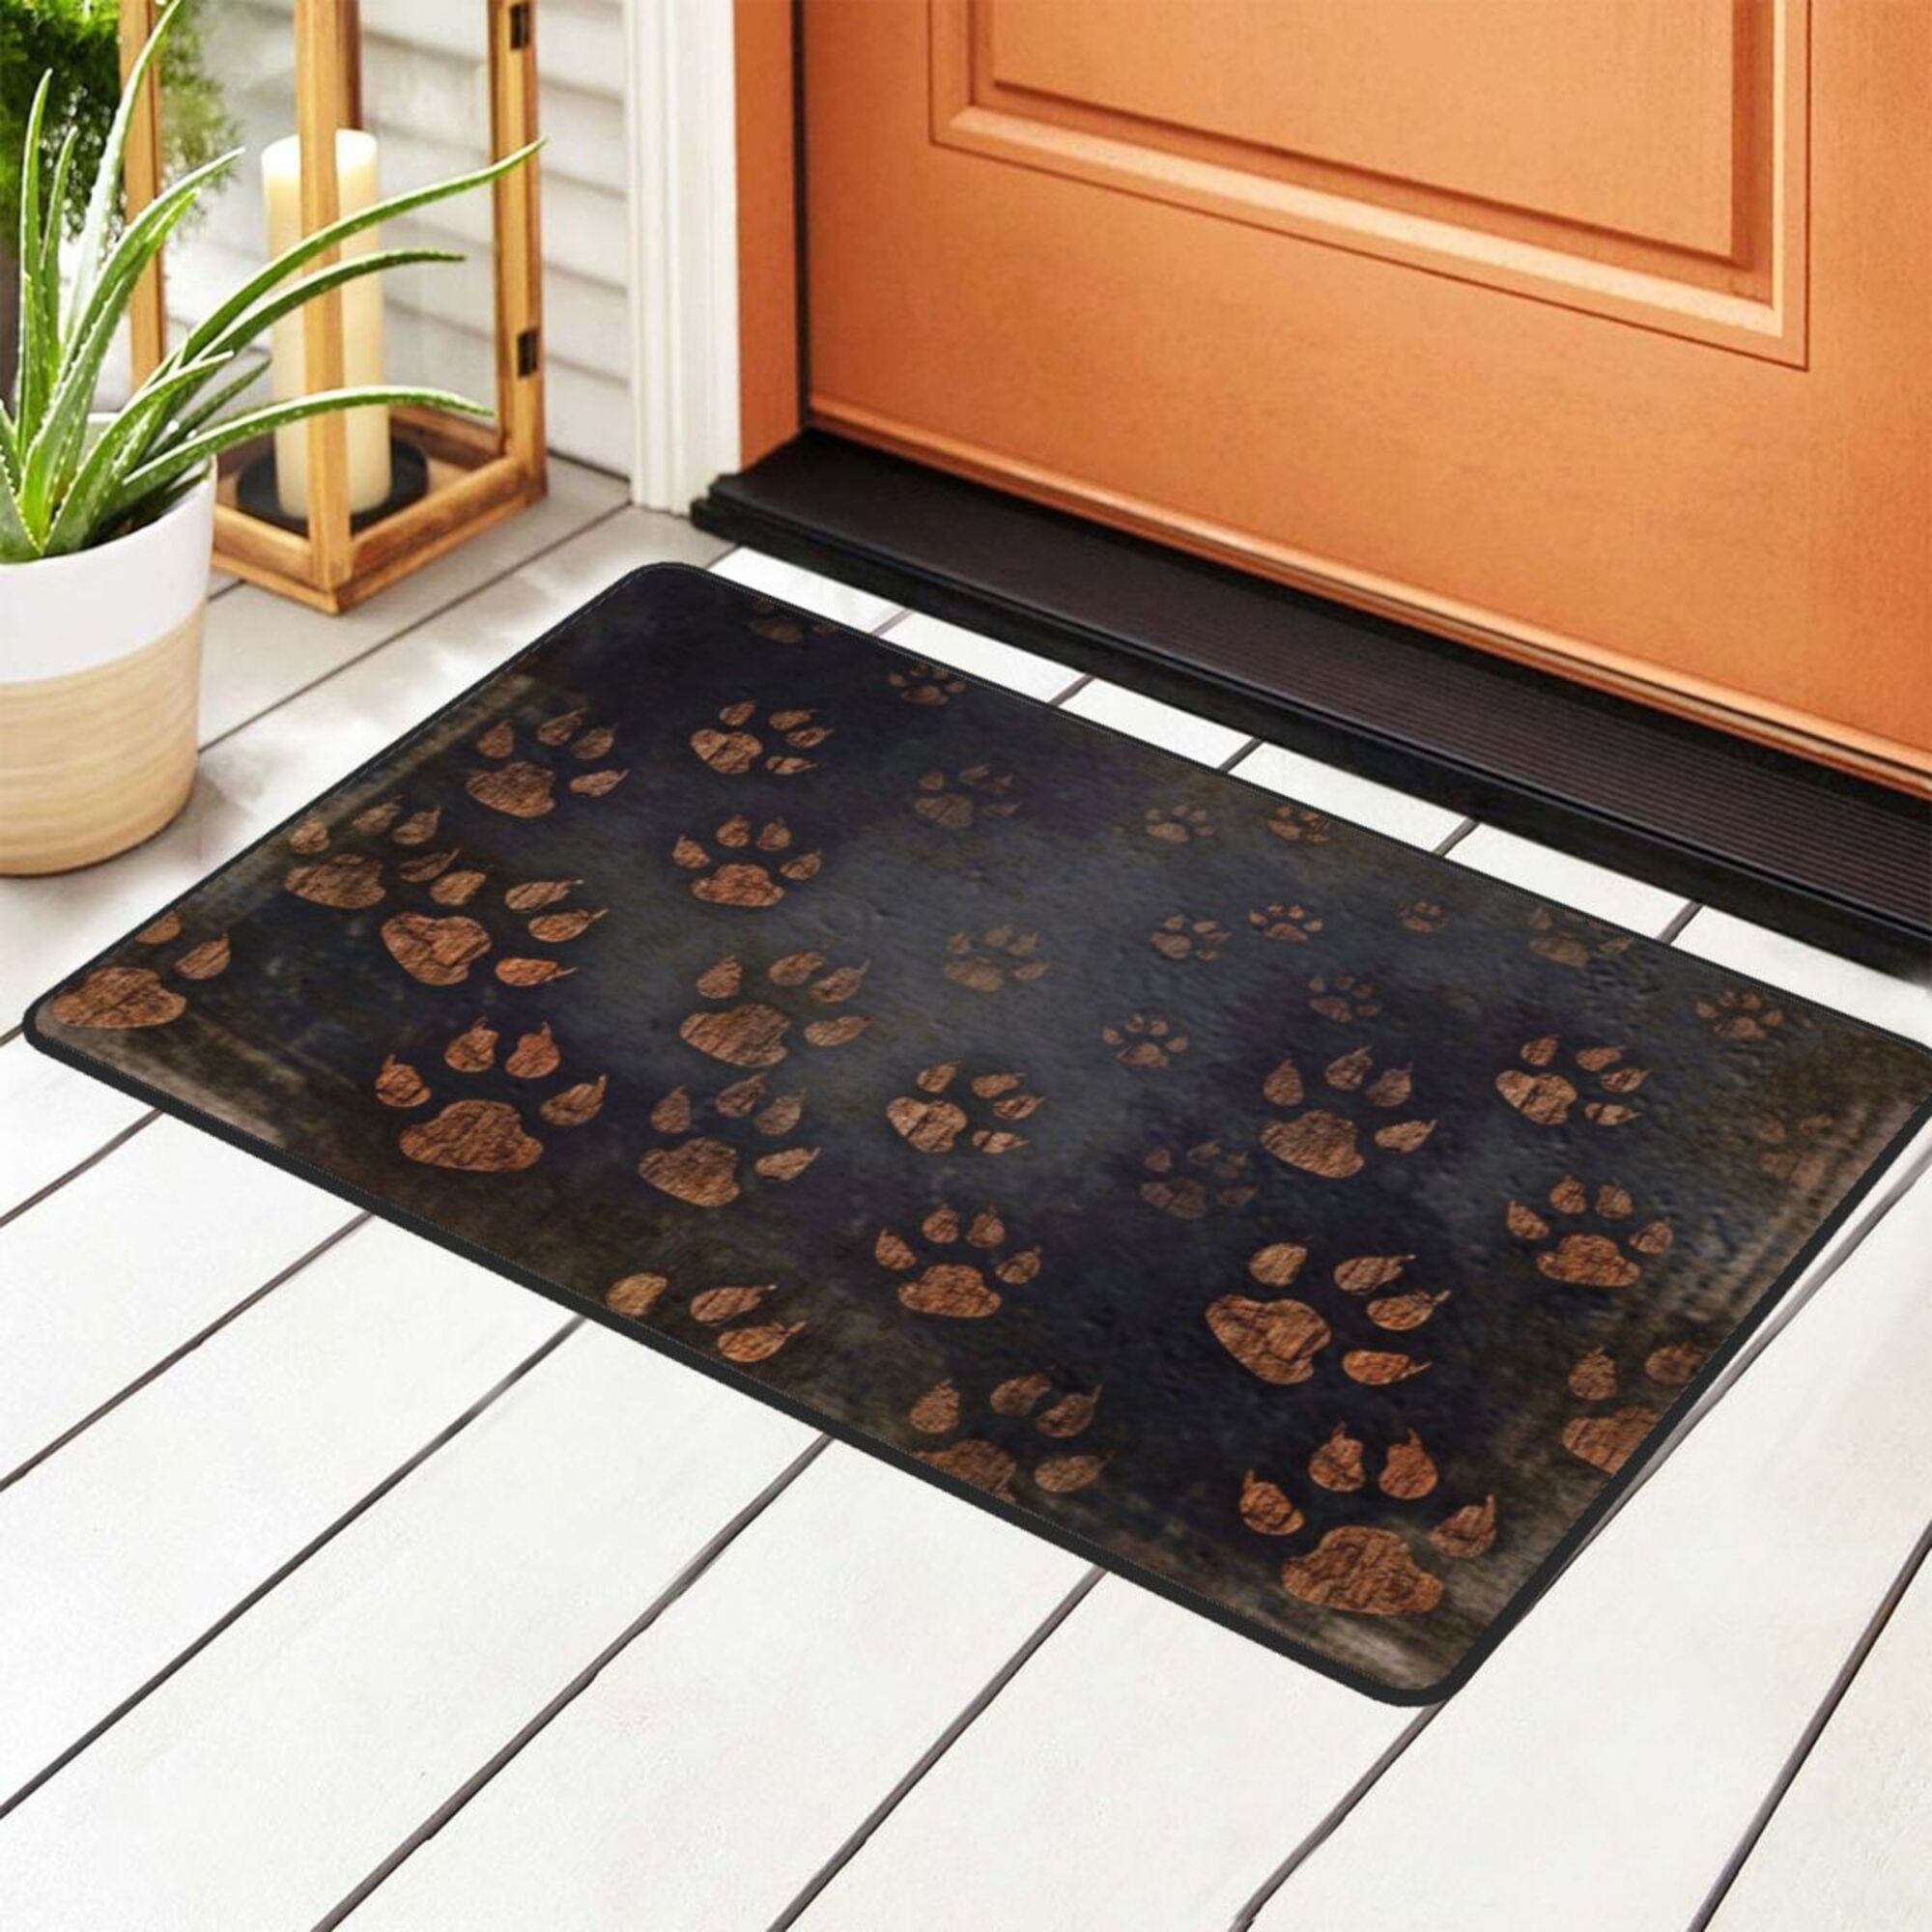 Dog Paw Print Area Rugs 3x5 ft for Bedroom Living Room - Puppy Paw Print  Carpet for Kids Girls Room Decor, Animal Footprint Printed Floor Rug for  Home